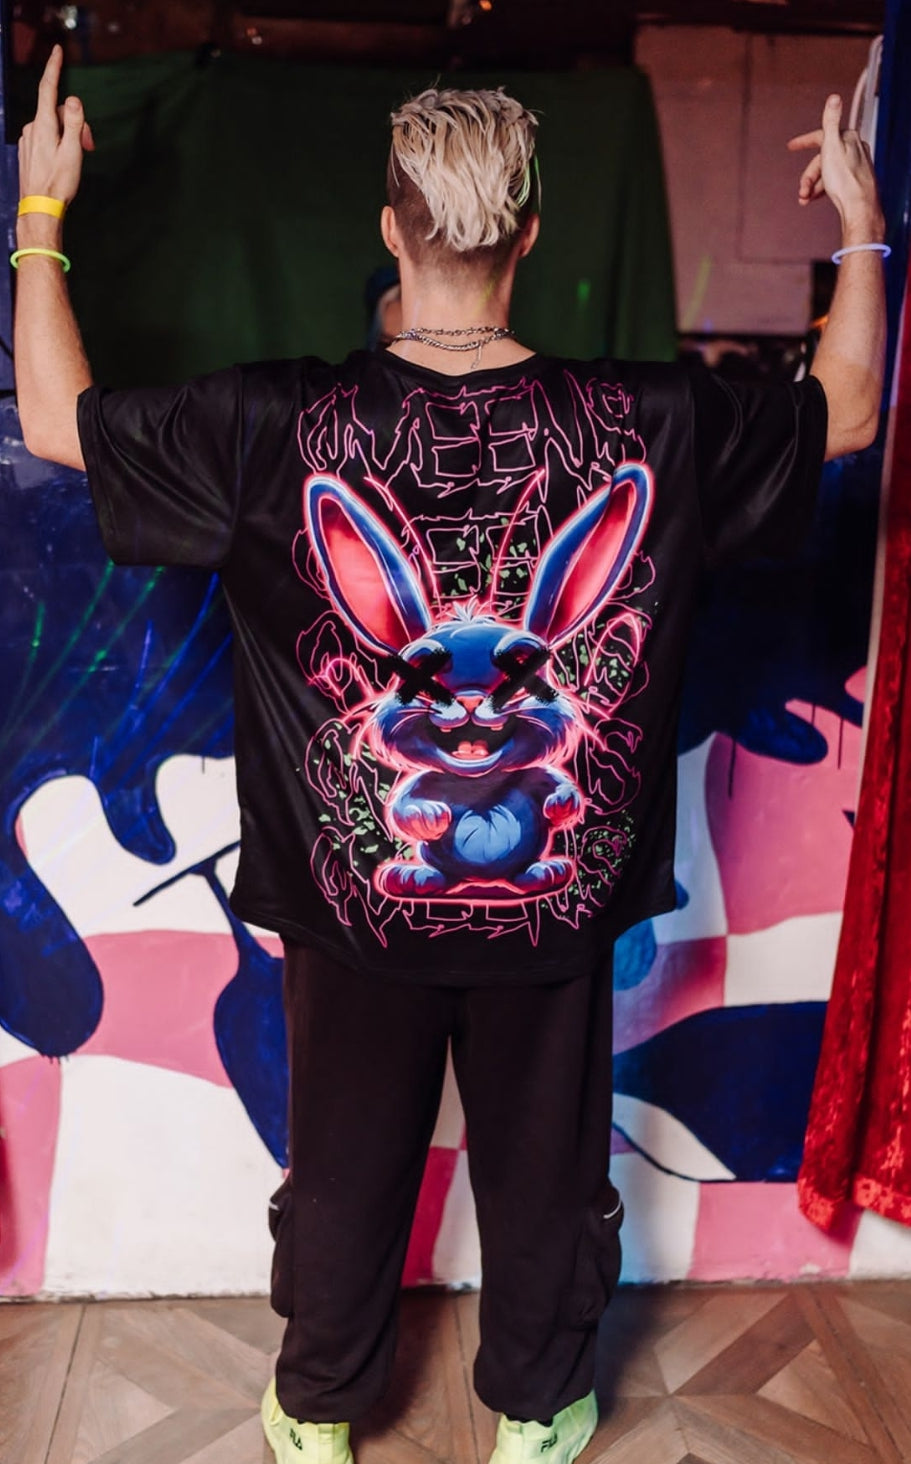 Qveens - Toxic Rave Bunny - Oversized T-shirt - Sports wear fabric